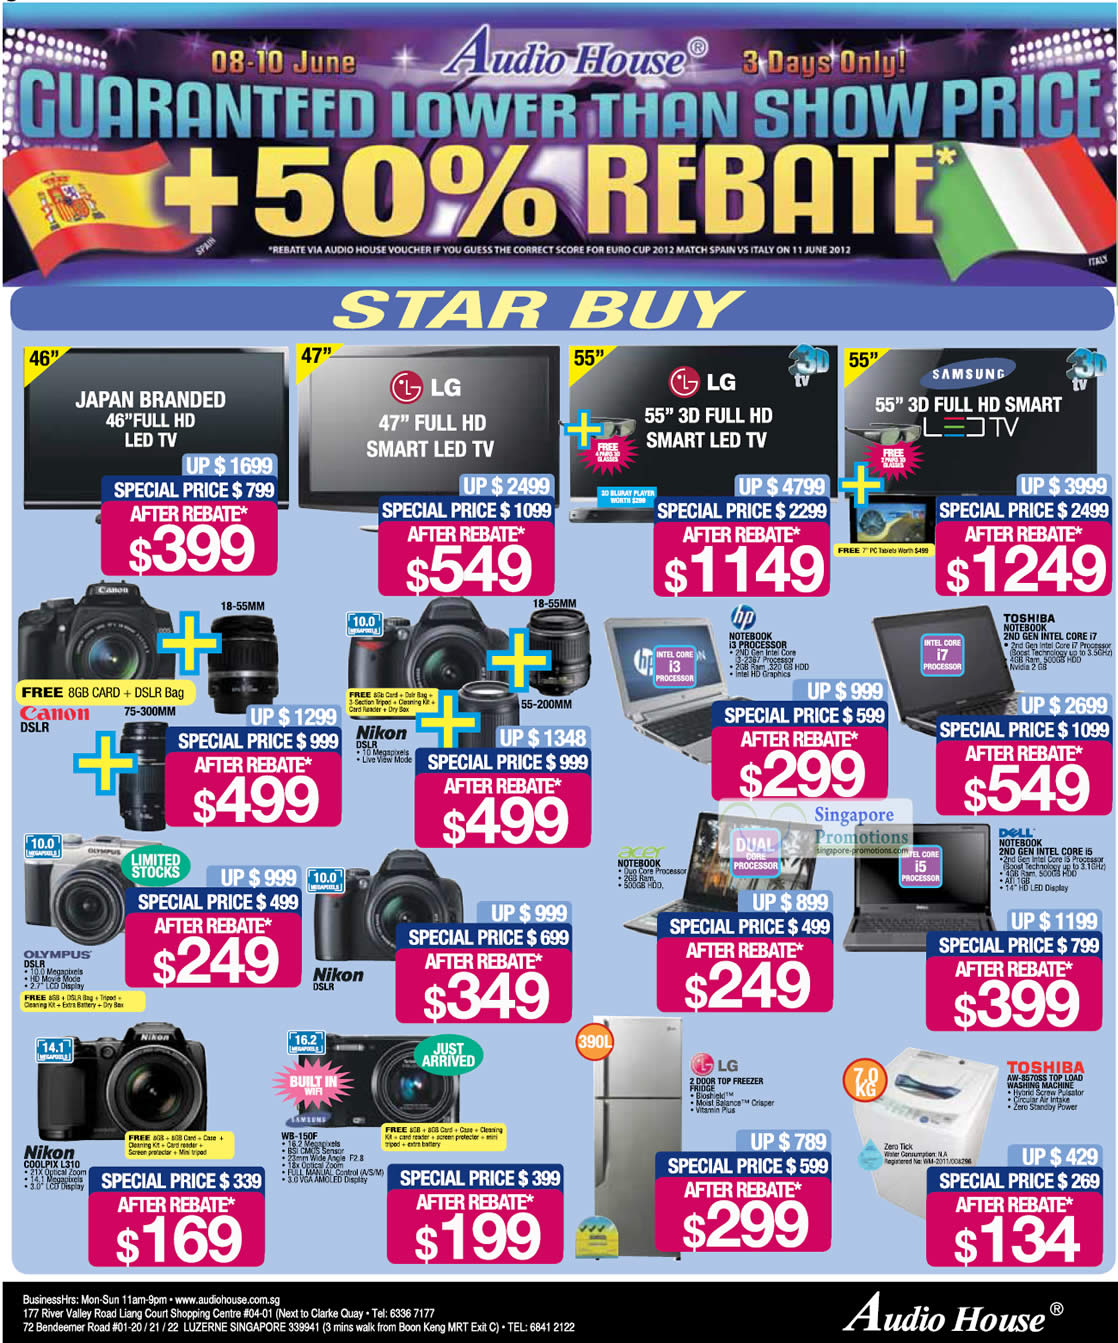 Featured image for Audio House Electronics, TV, Digital Cameras, Notebooks & Appliances Offers 8 - 14 June 2012